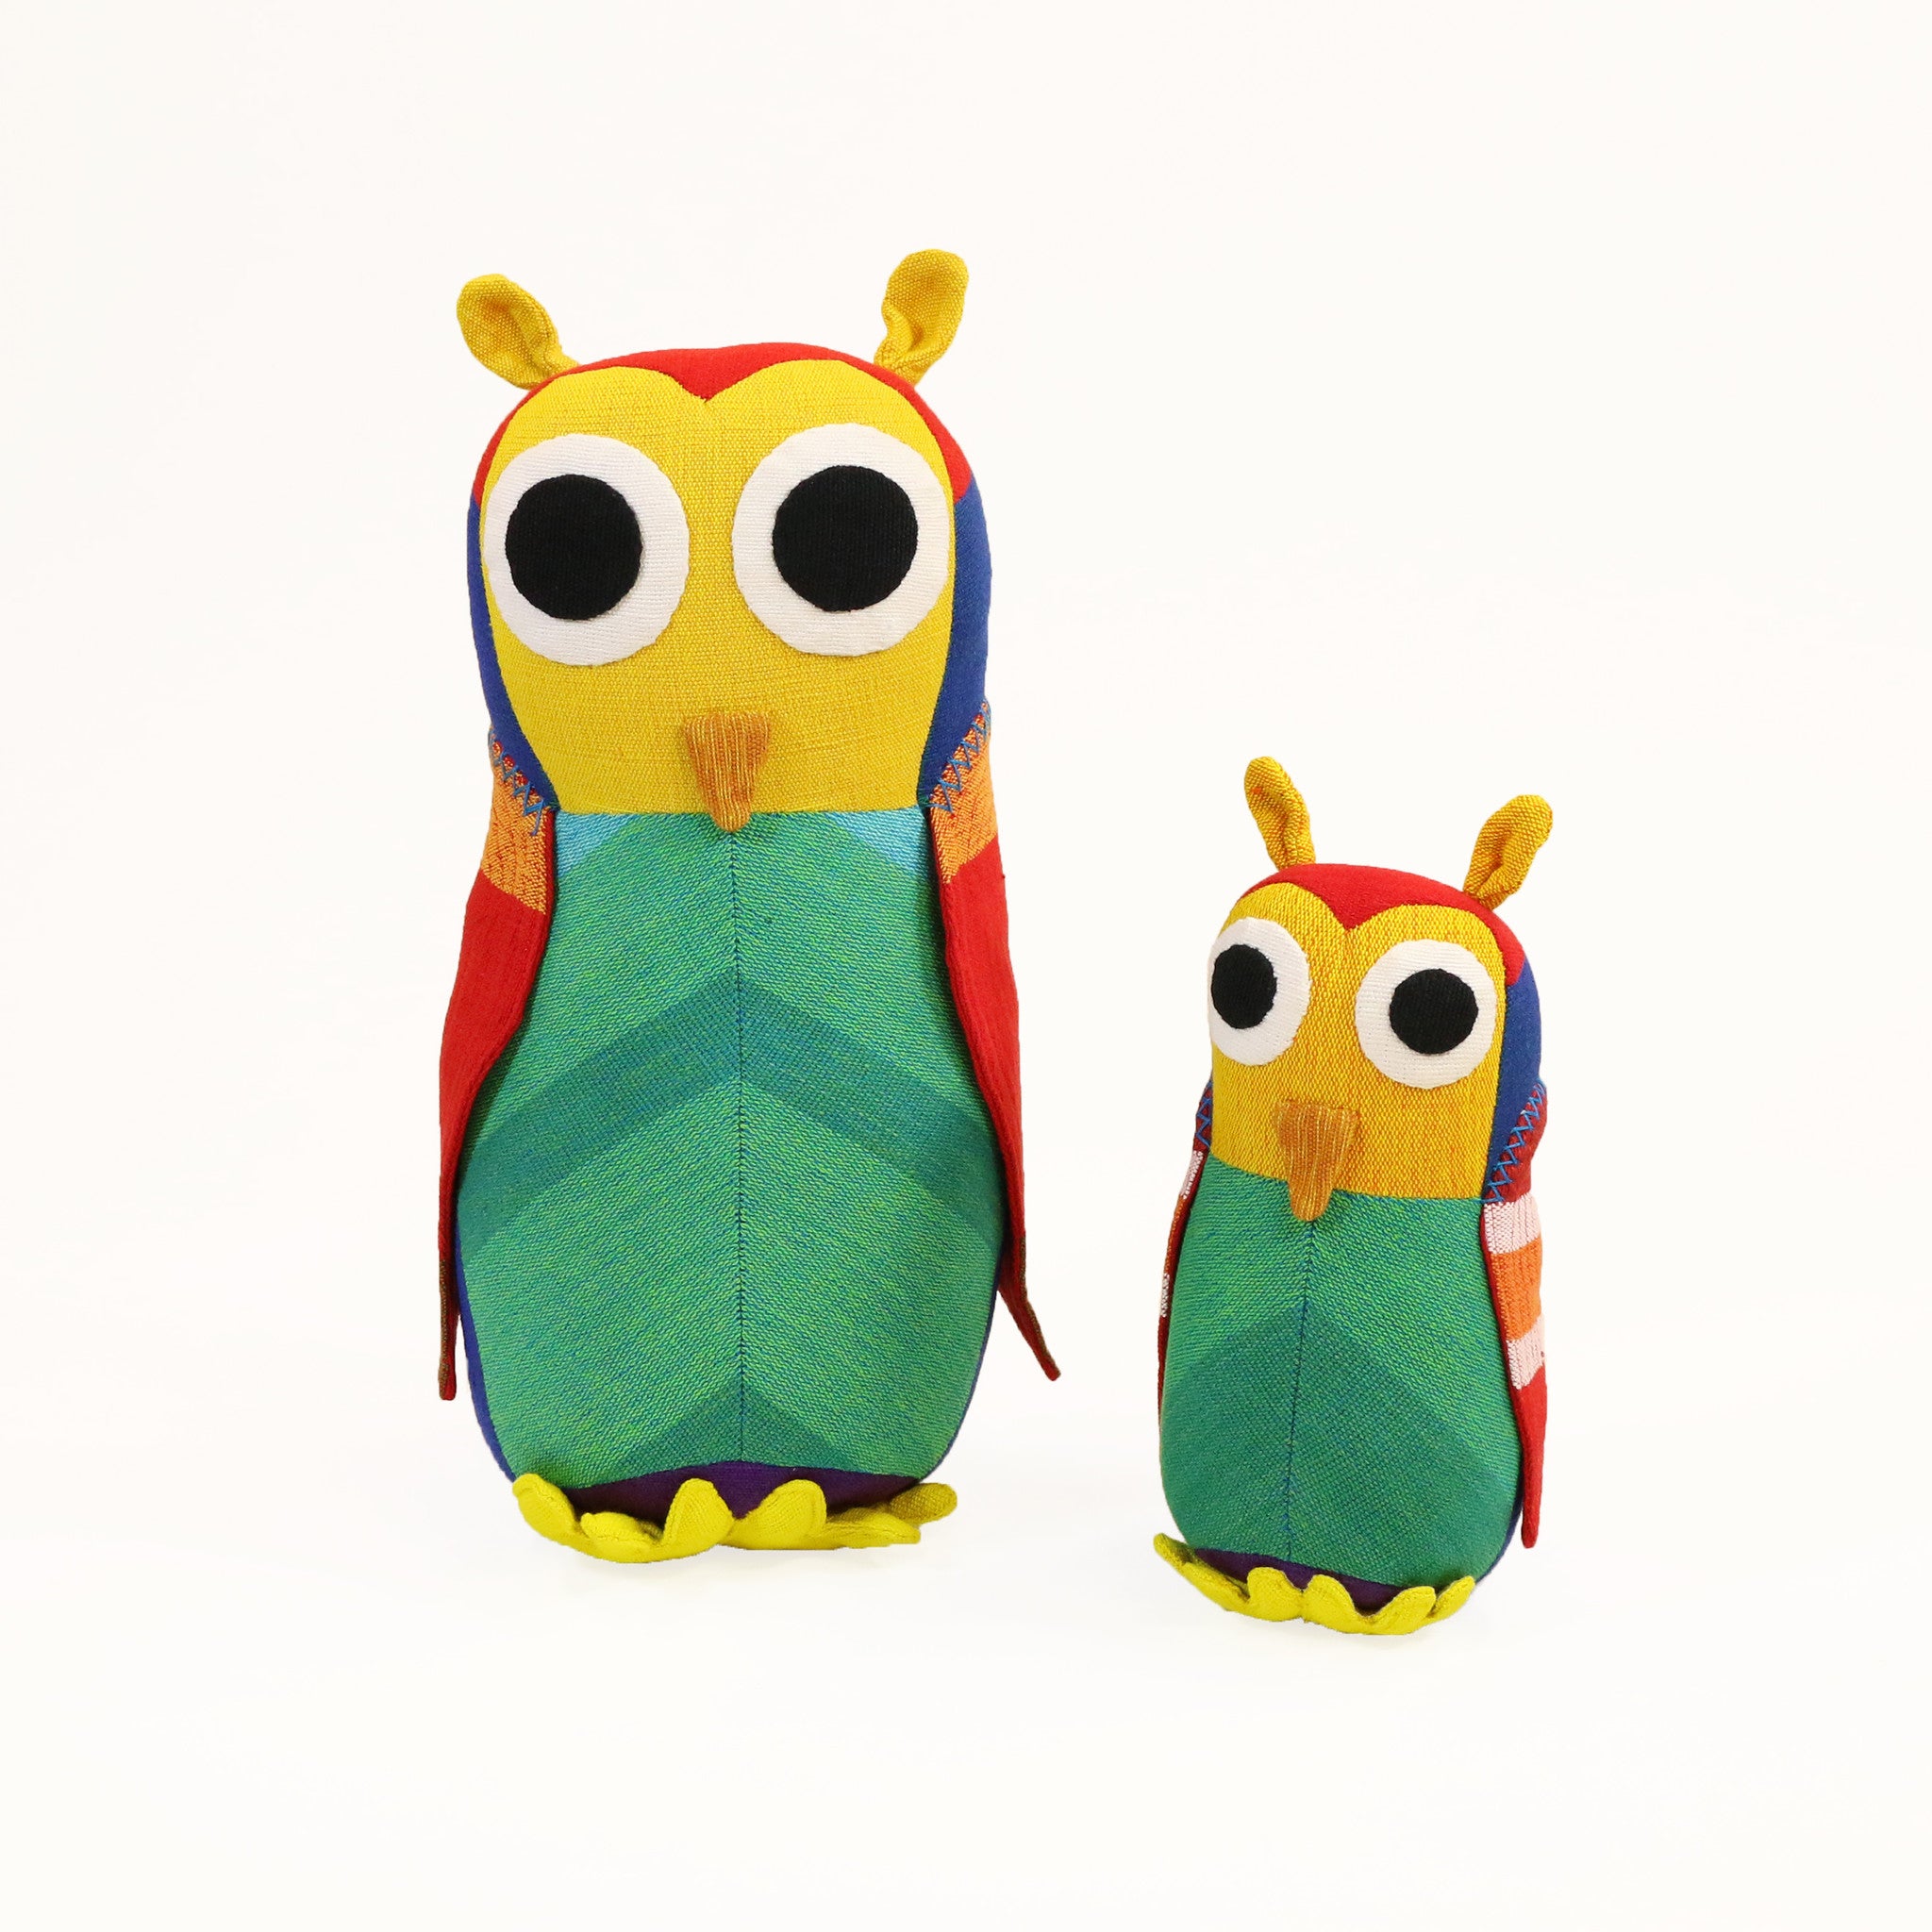 Owl Toy - Harrison, the Owl (small & large sizes)